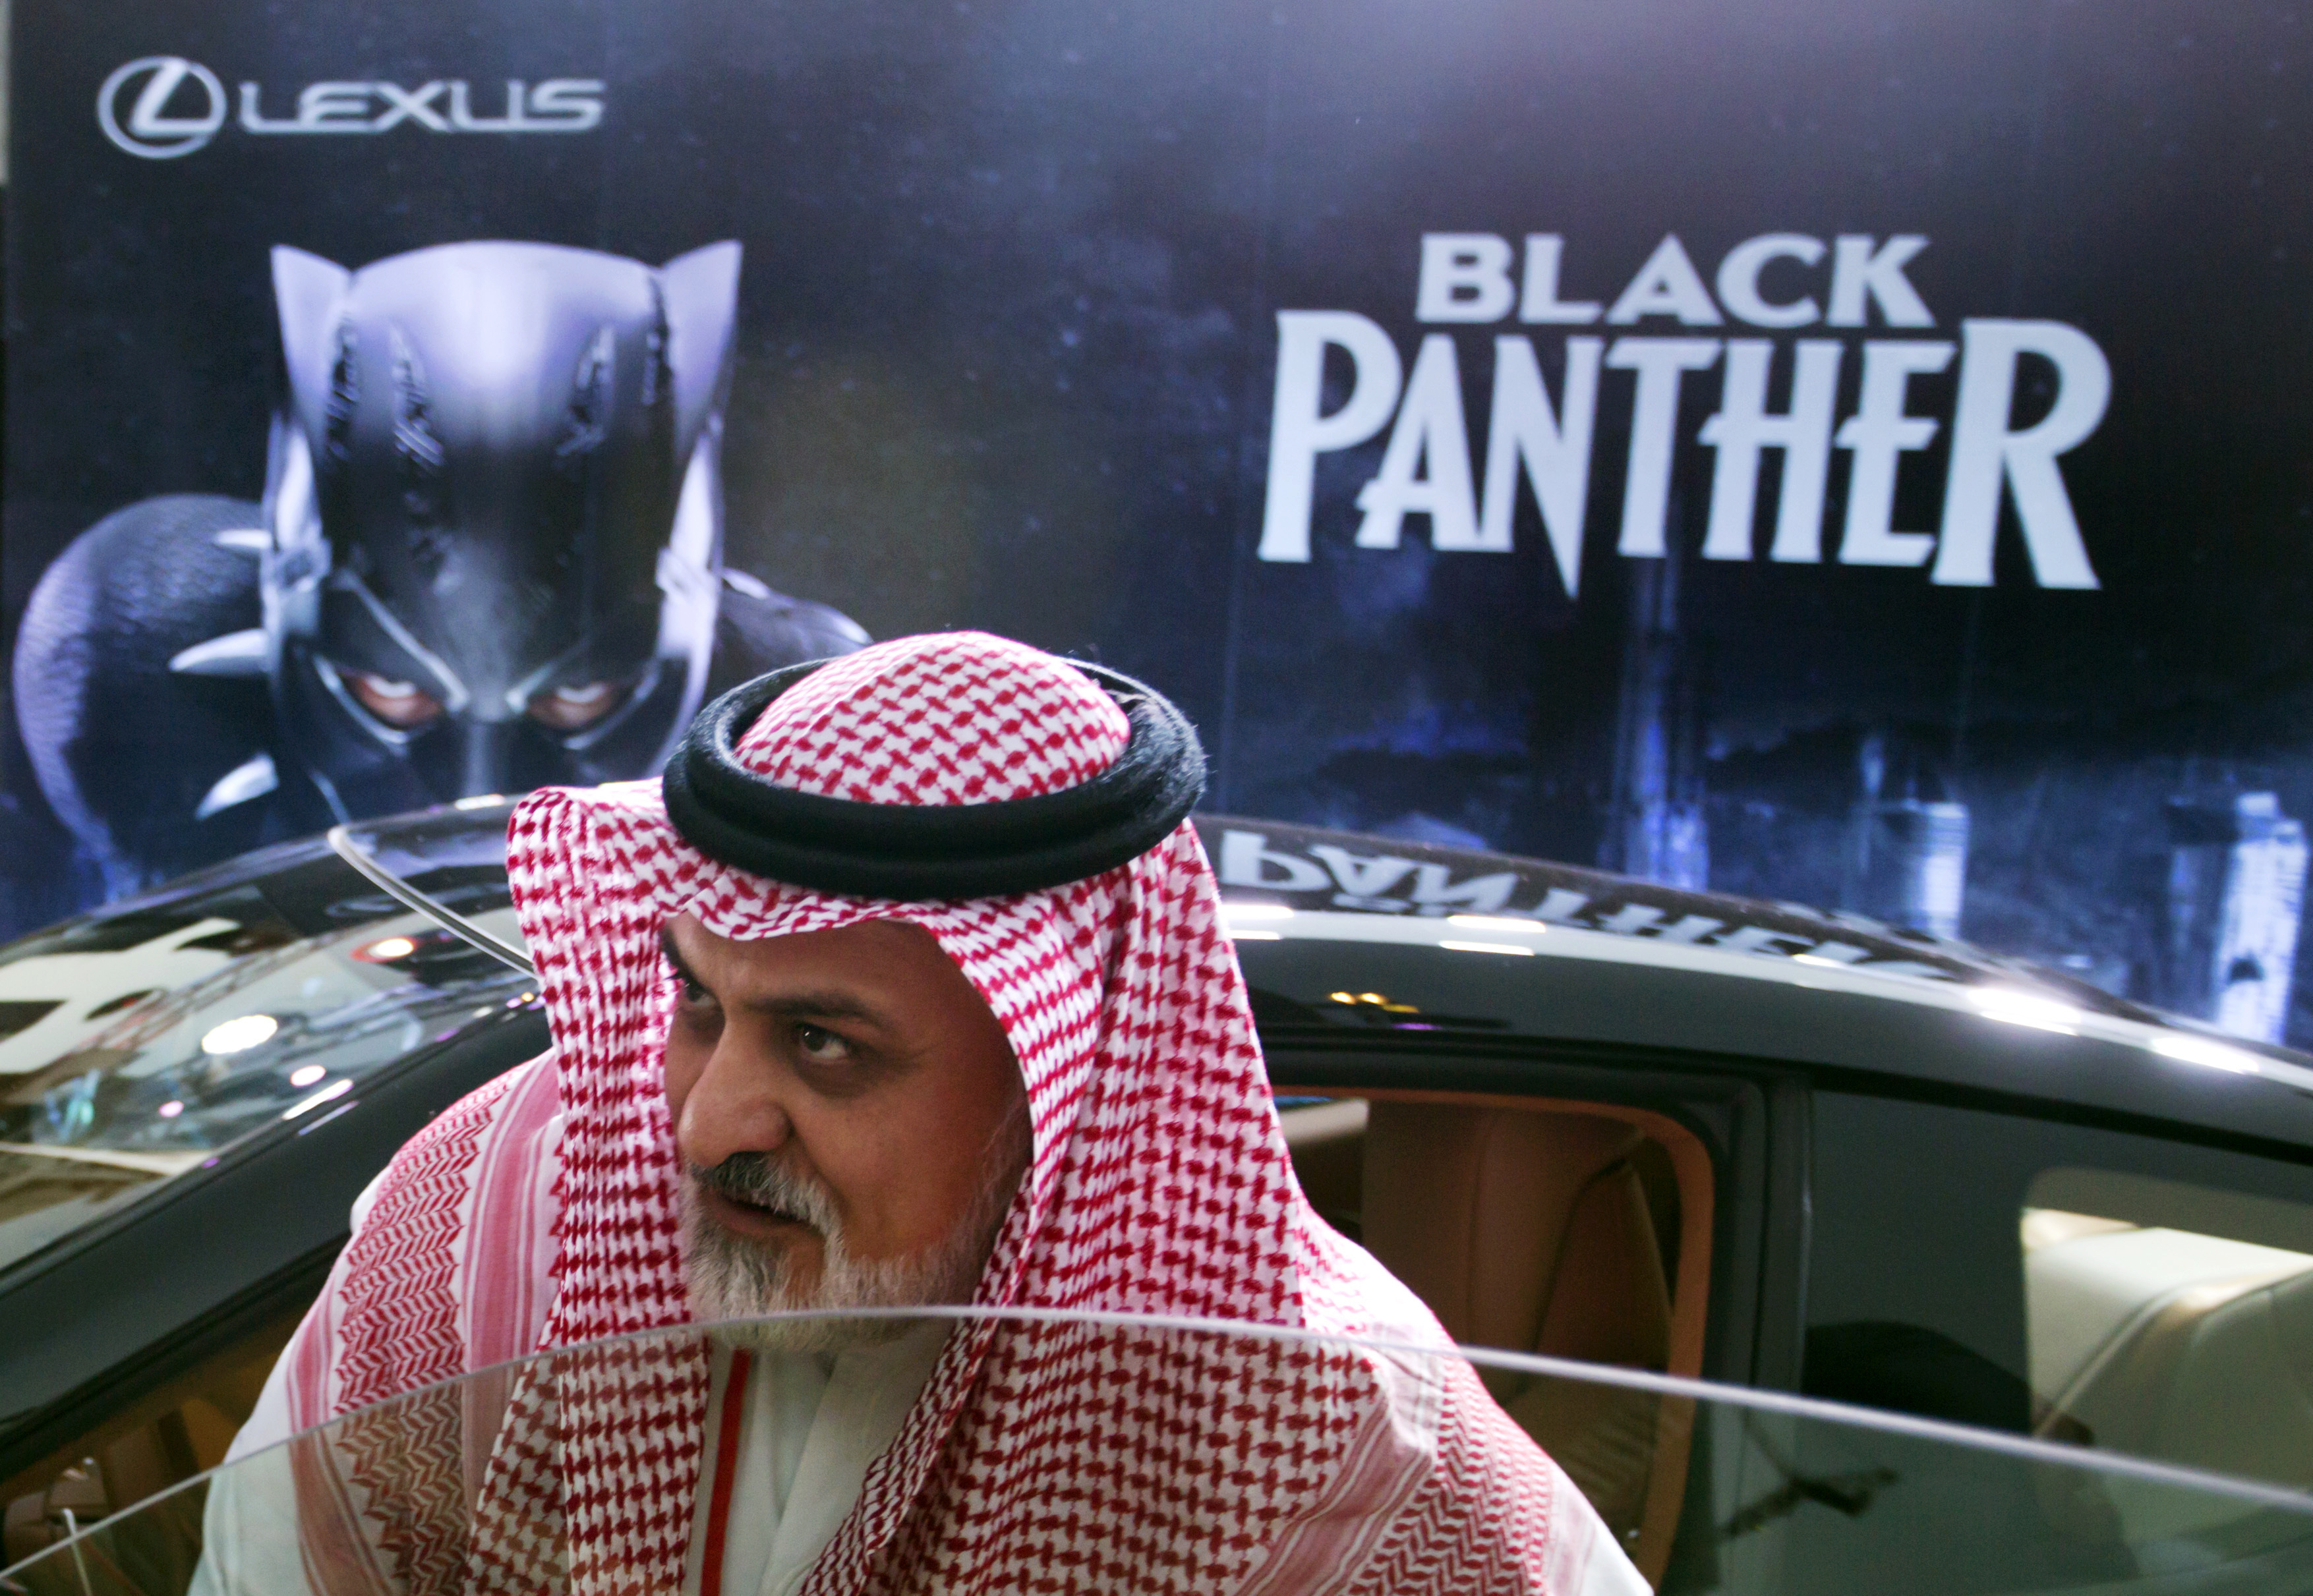 A visitor checks out a Lexus car, similar to a one used in the Black Panther film, that is on display outside an invitation-only screening, at the King Abdullah Financial District Theater, in Riyadh, Saudi Arabia, Wednesday, April 18, 2018. Saudi Arabia held a private screening of the Hollywood blockbuster 